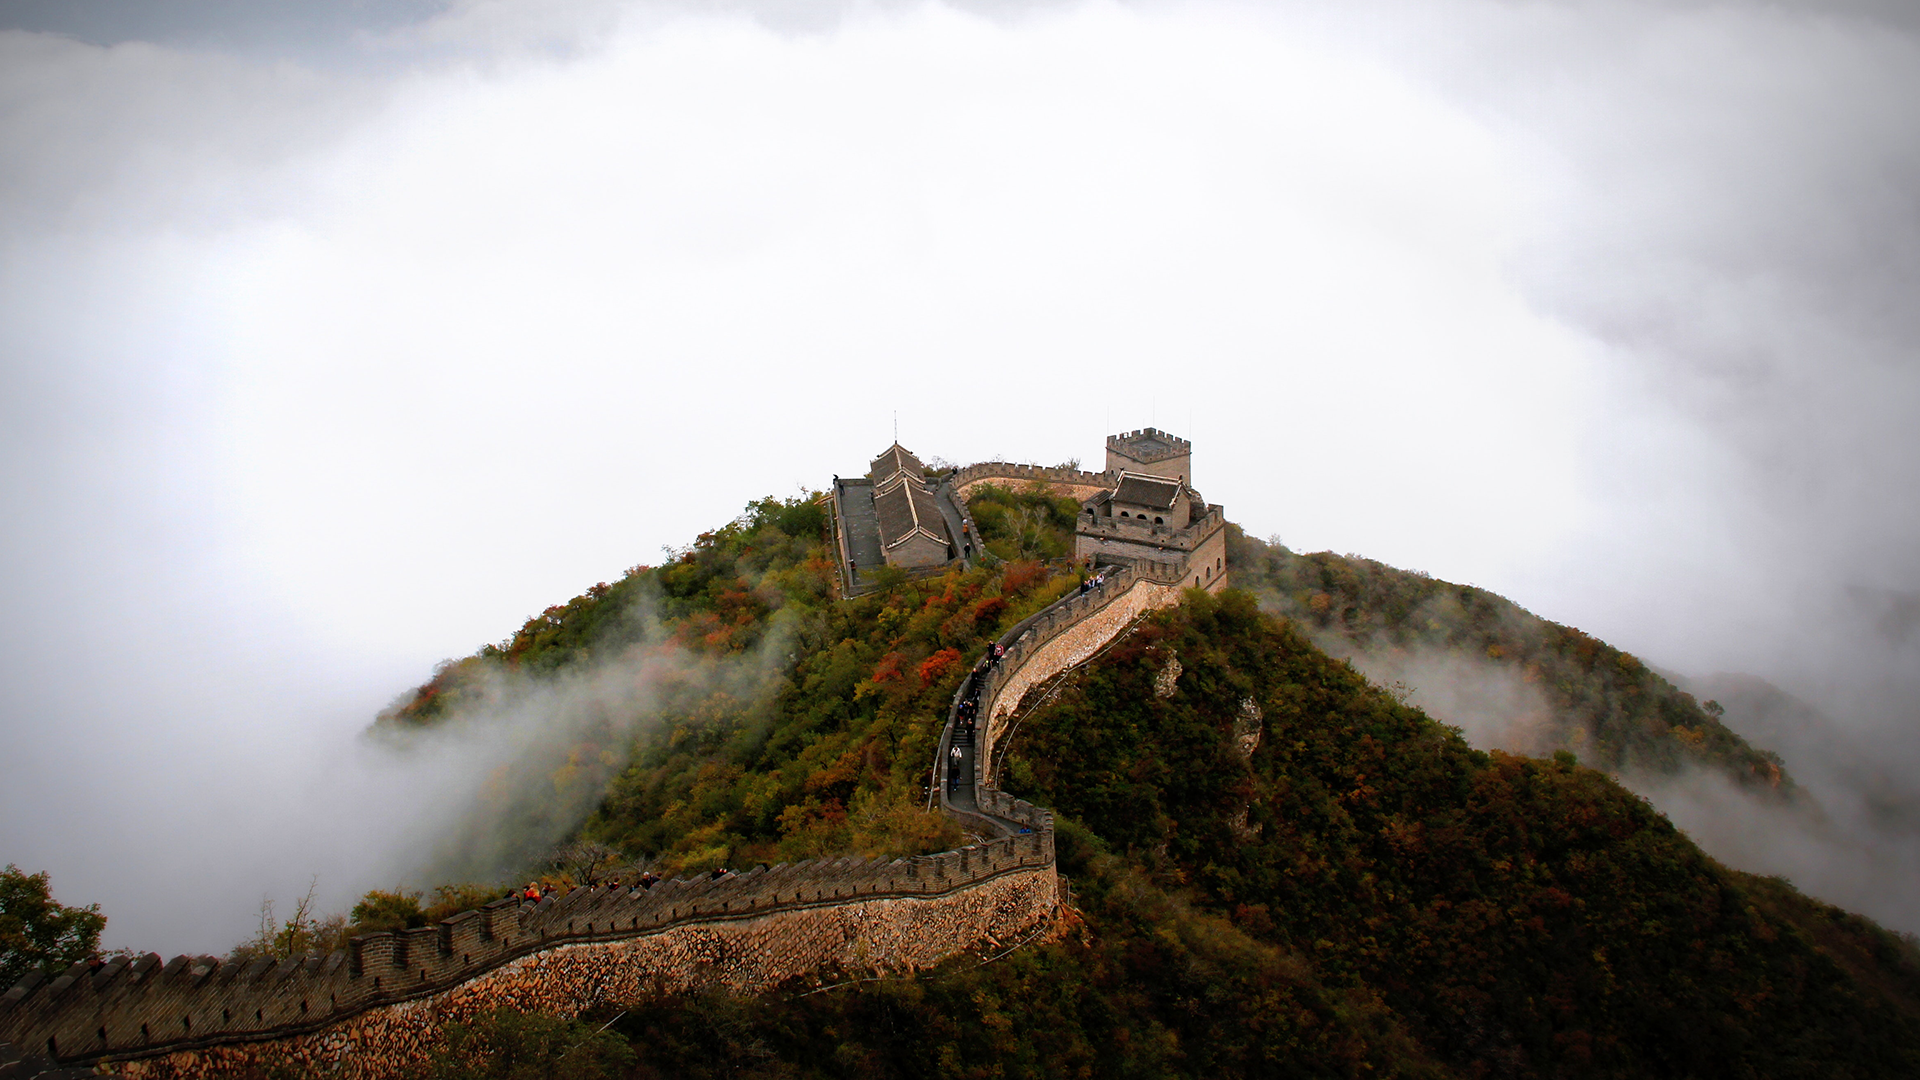 A photo of the Great Wall of China, on a mountain top above the clouds, taken from above